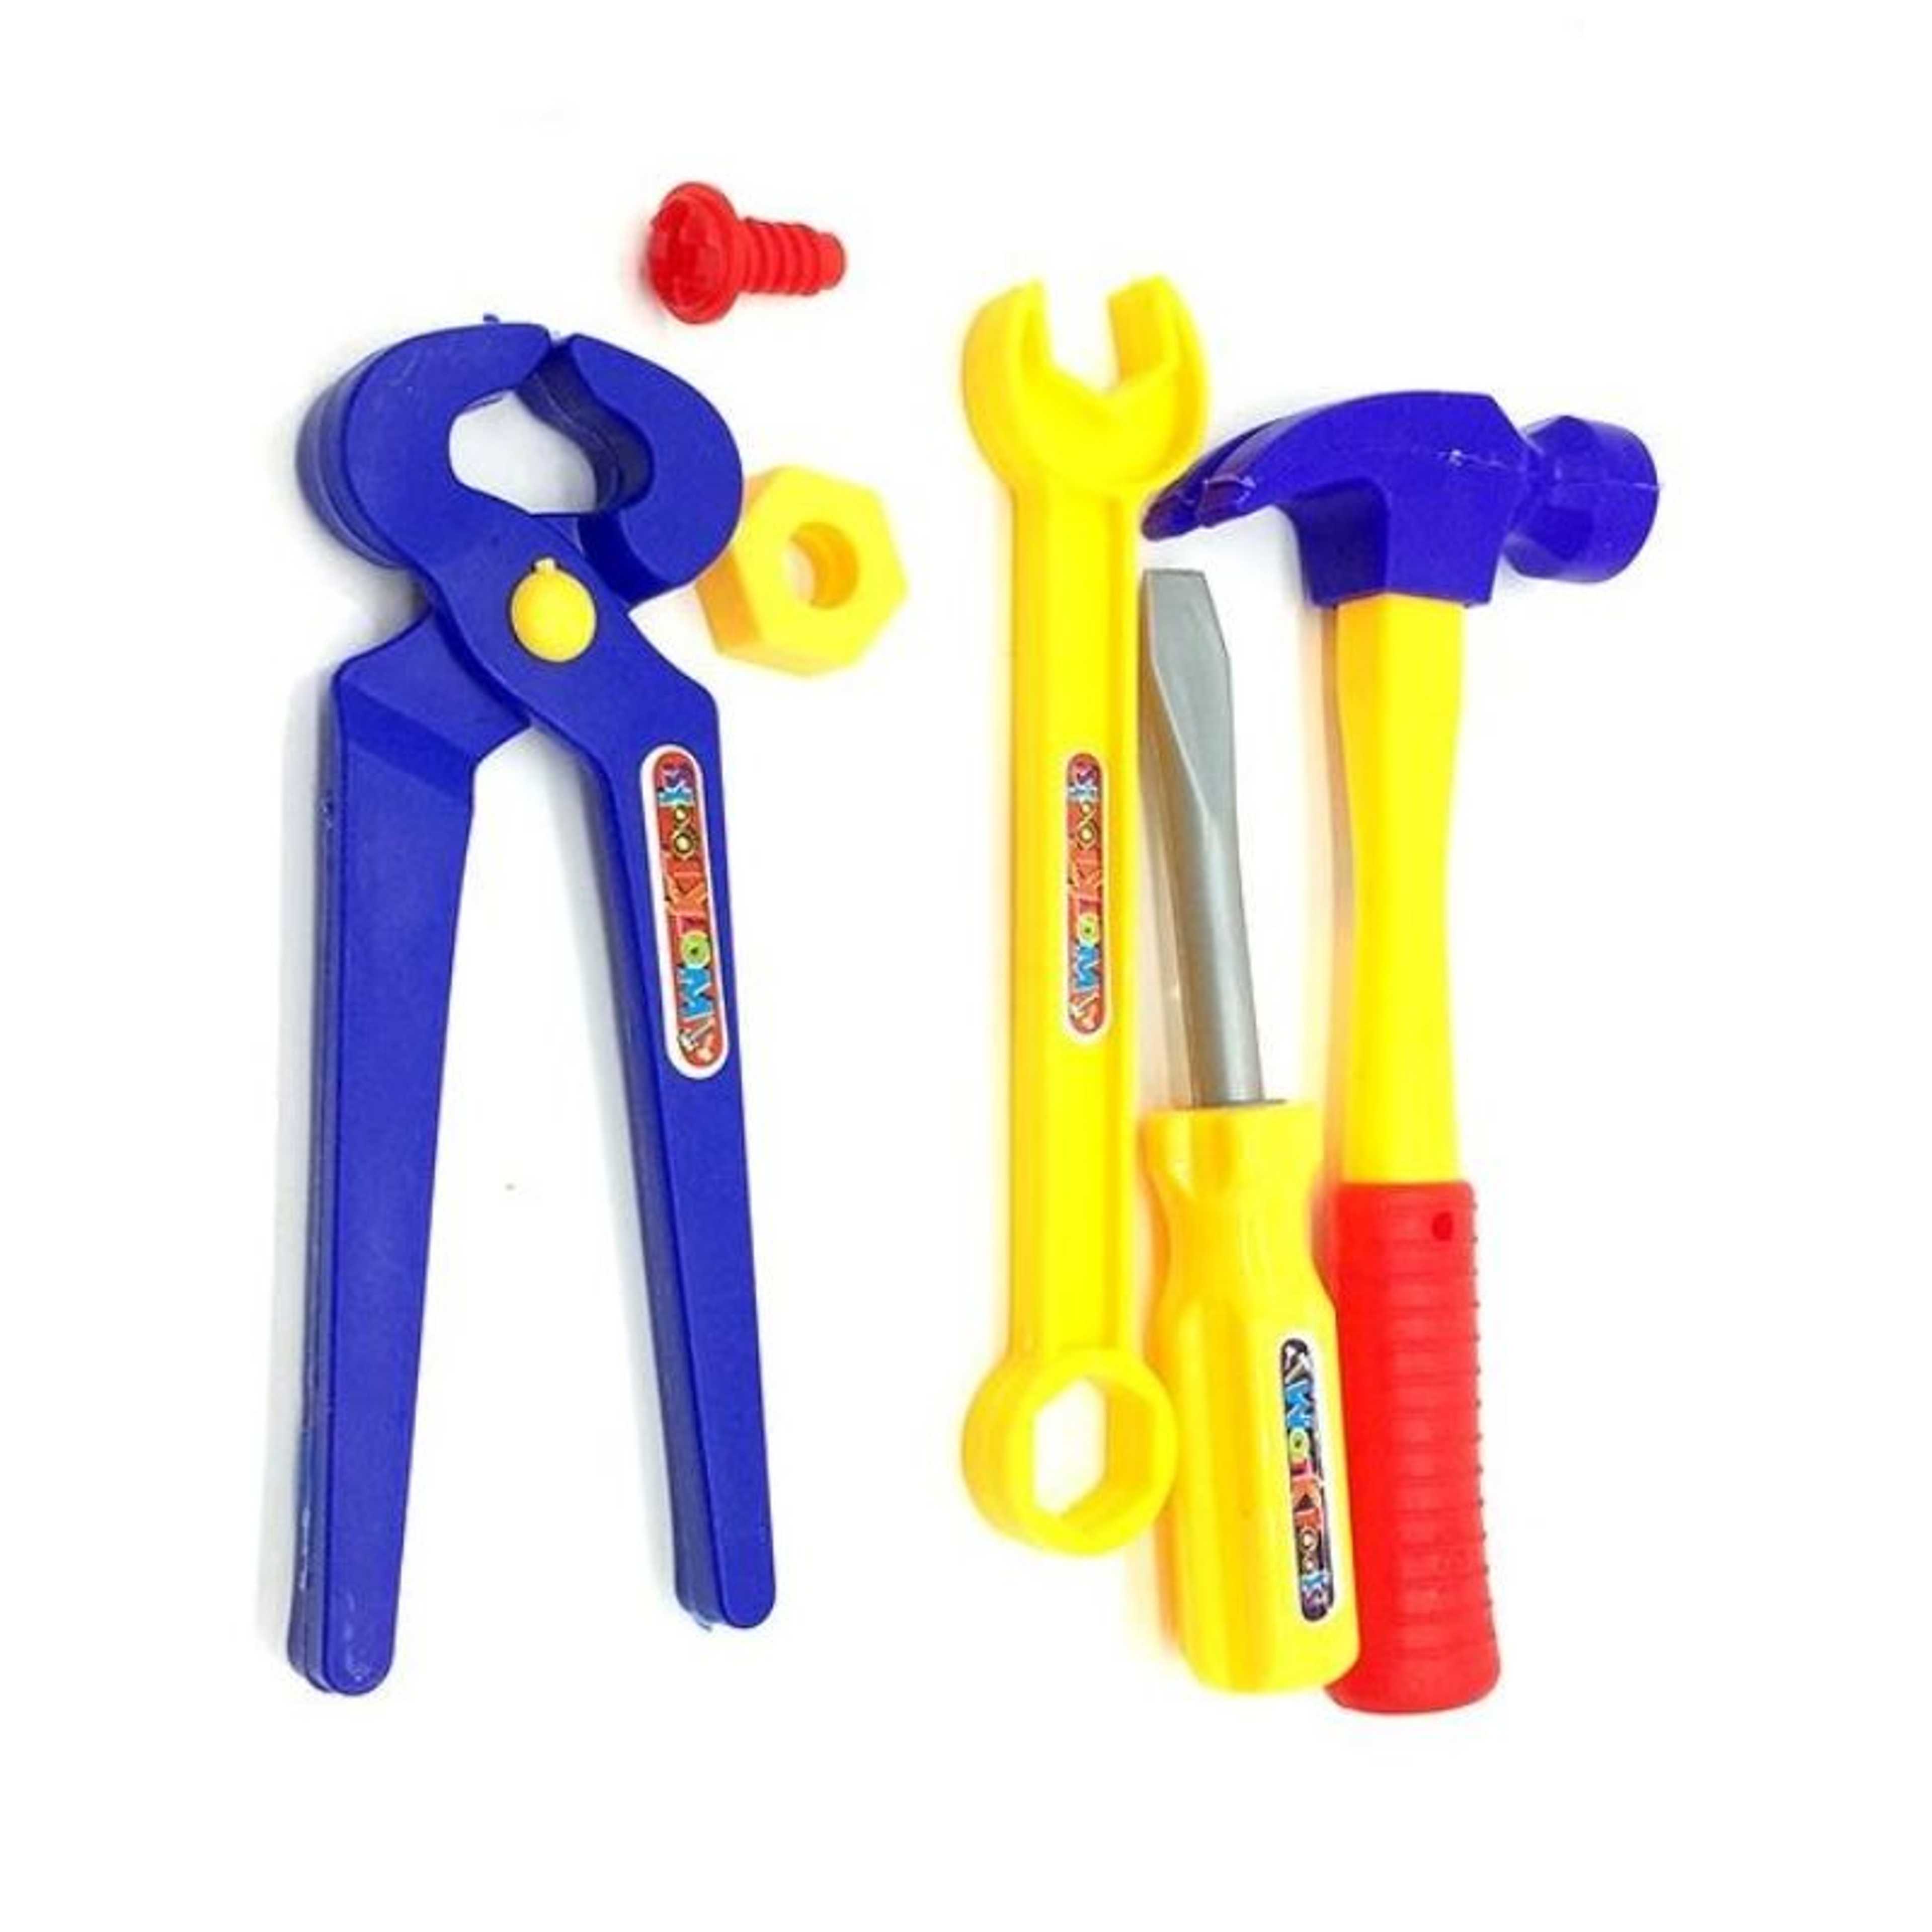 6 Piece's High Quality Kids Plastic Tools Set, Plastic Electric Tools For Kids